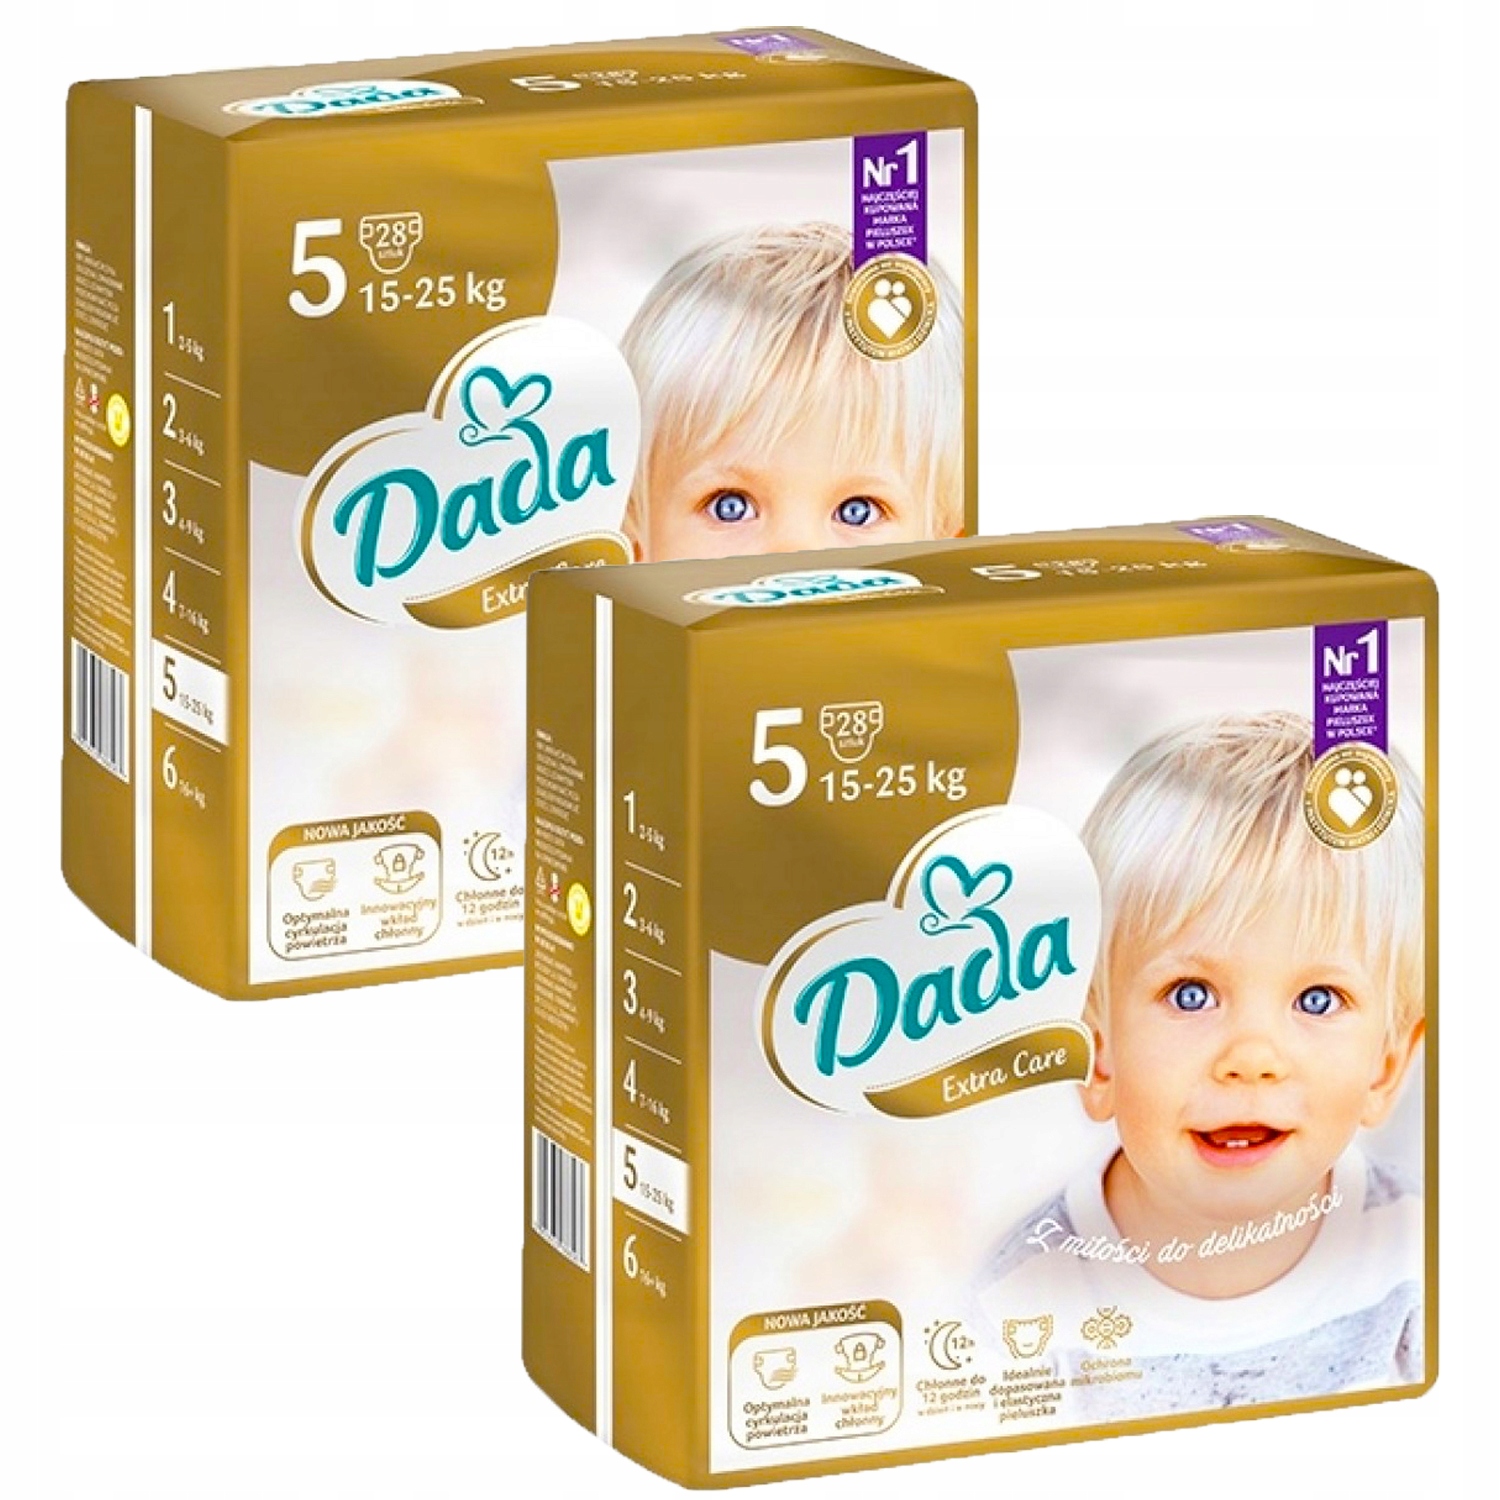 promocja pieluch pampers 4